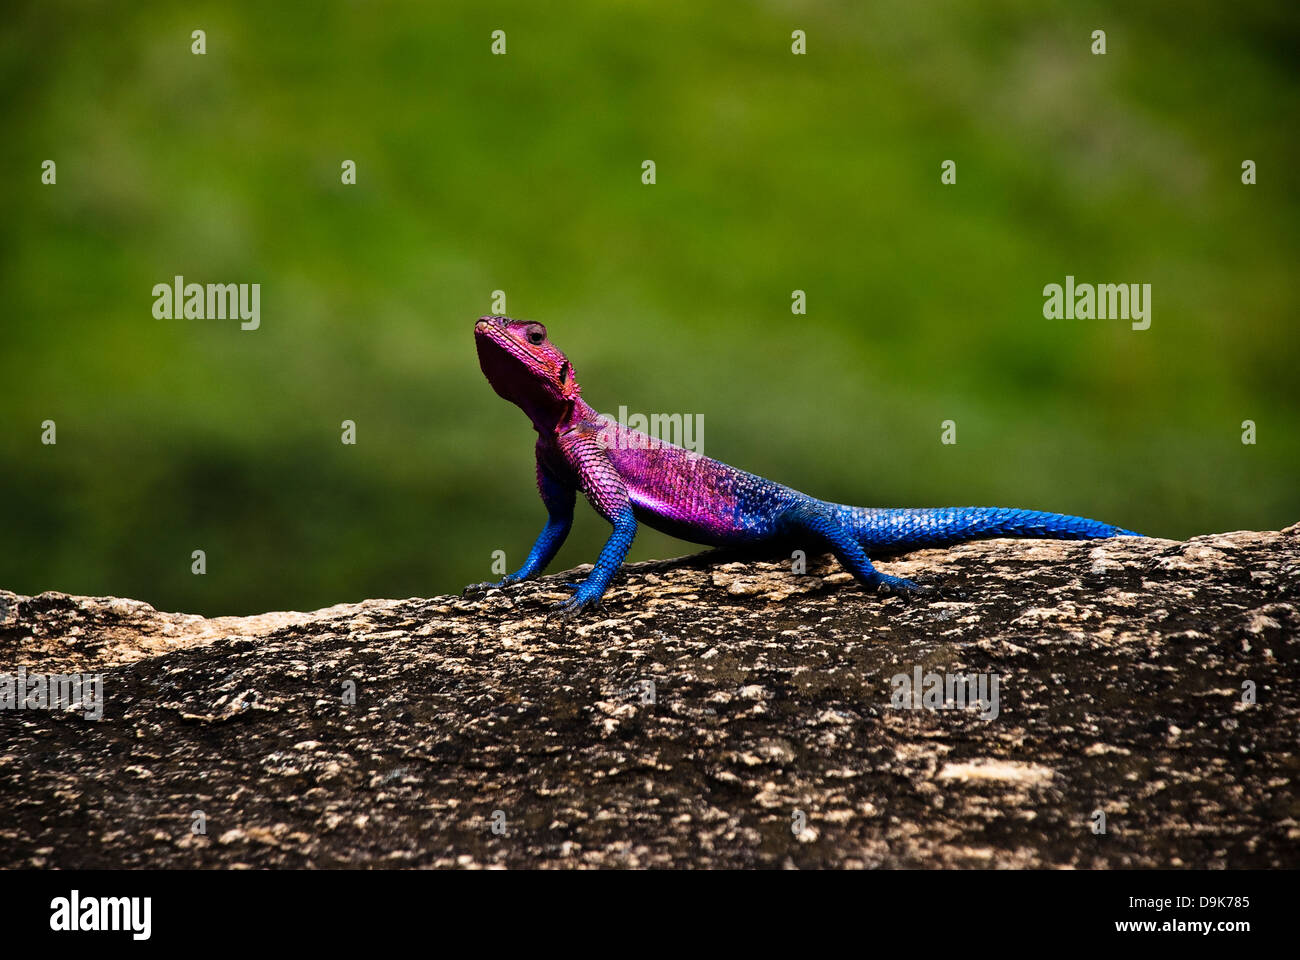 A colourful agama lizard sunbathing on a rock in africa Stock Photo